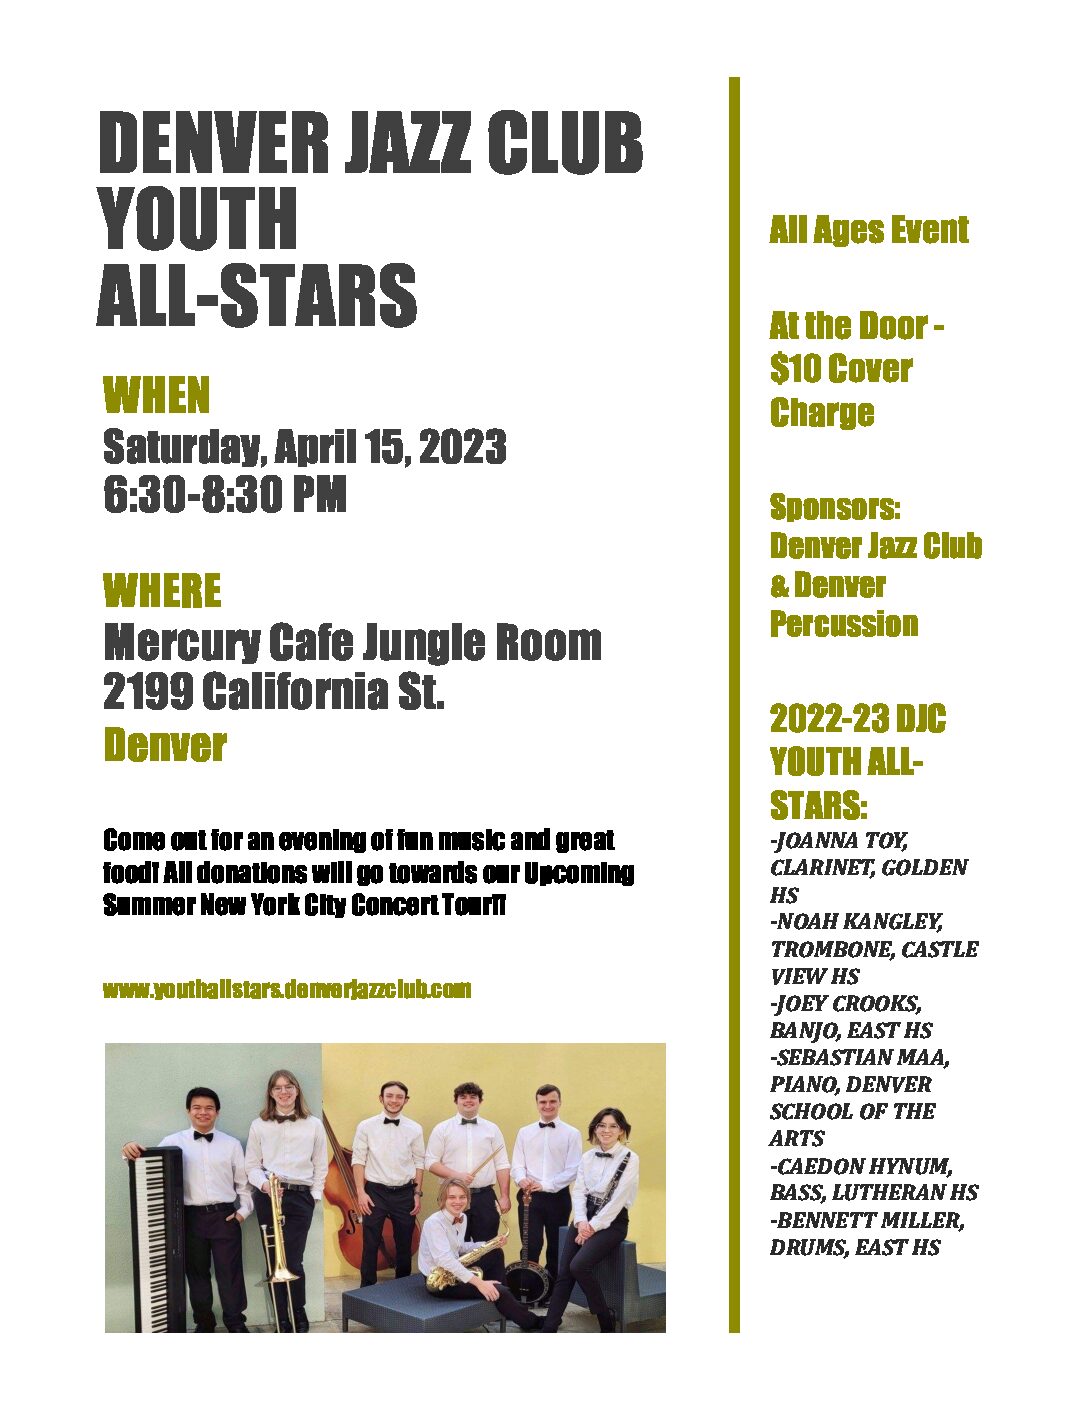 Denver Jazz Club Youth All-Stars to Perform at Mercury Cafe on April 15th and at the Denver Jazz Club on April 16th